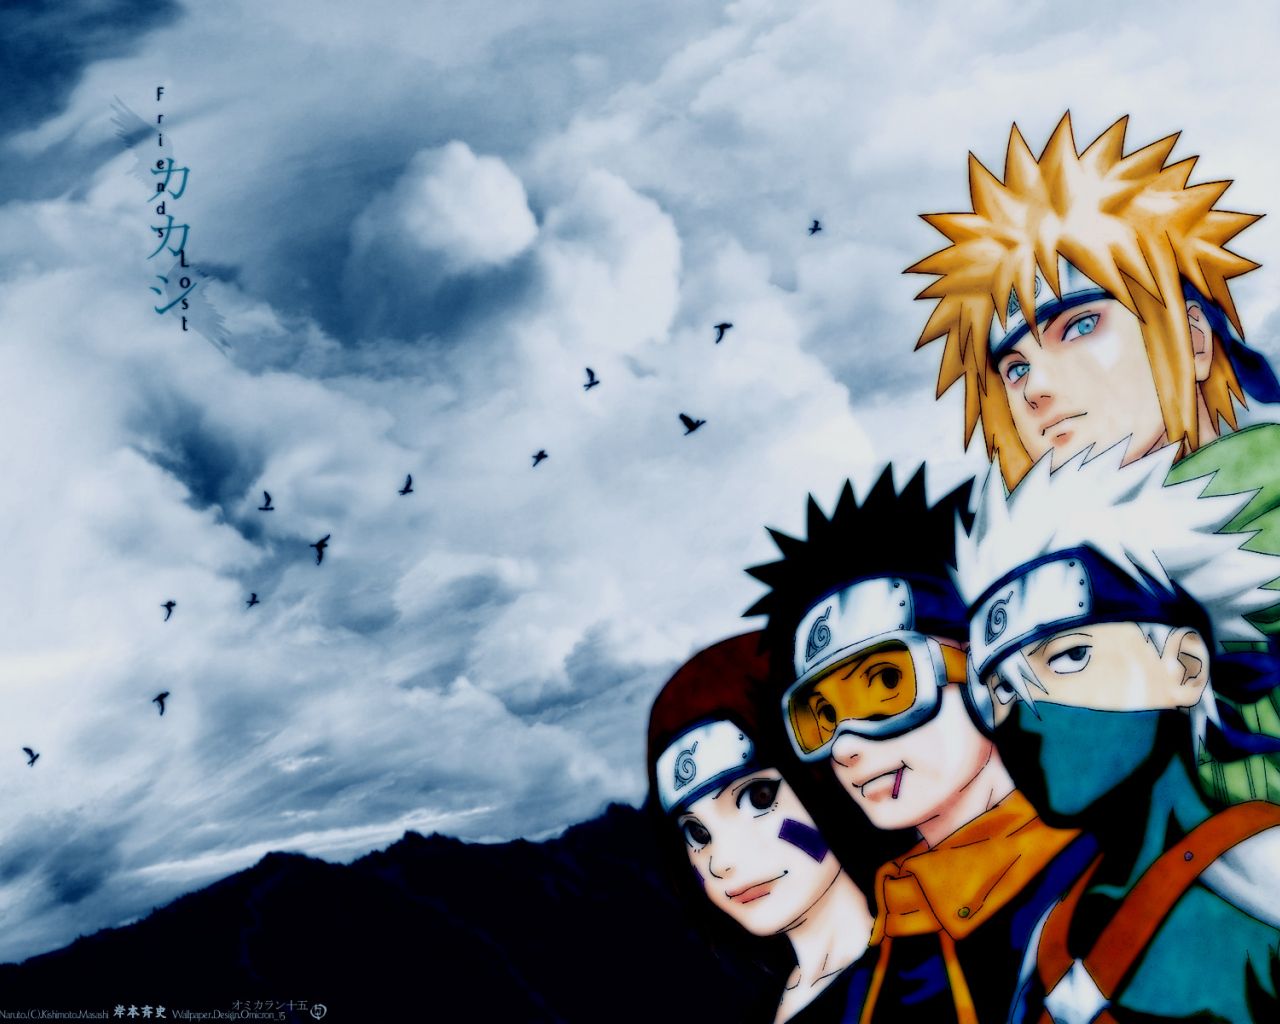 Free download Naruto Wallpaper Best Wallpaper [1600x1200] for your Desktop, Mobile & Tablet. Explore New Naruto Wallpaper. Naruto Shippuden Wallpaper, Naruto And Sasuke Wallpaper, Naruto Wallpaper HD